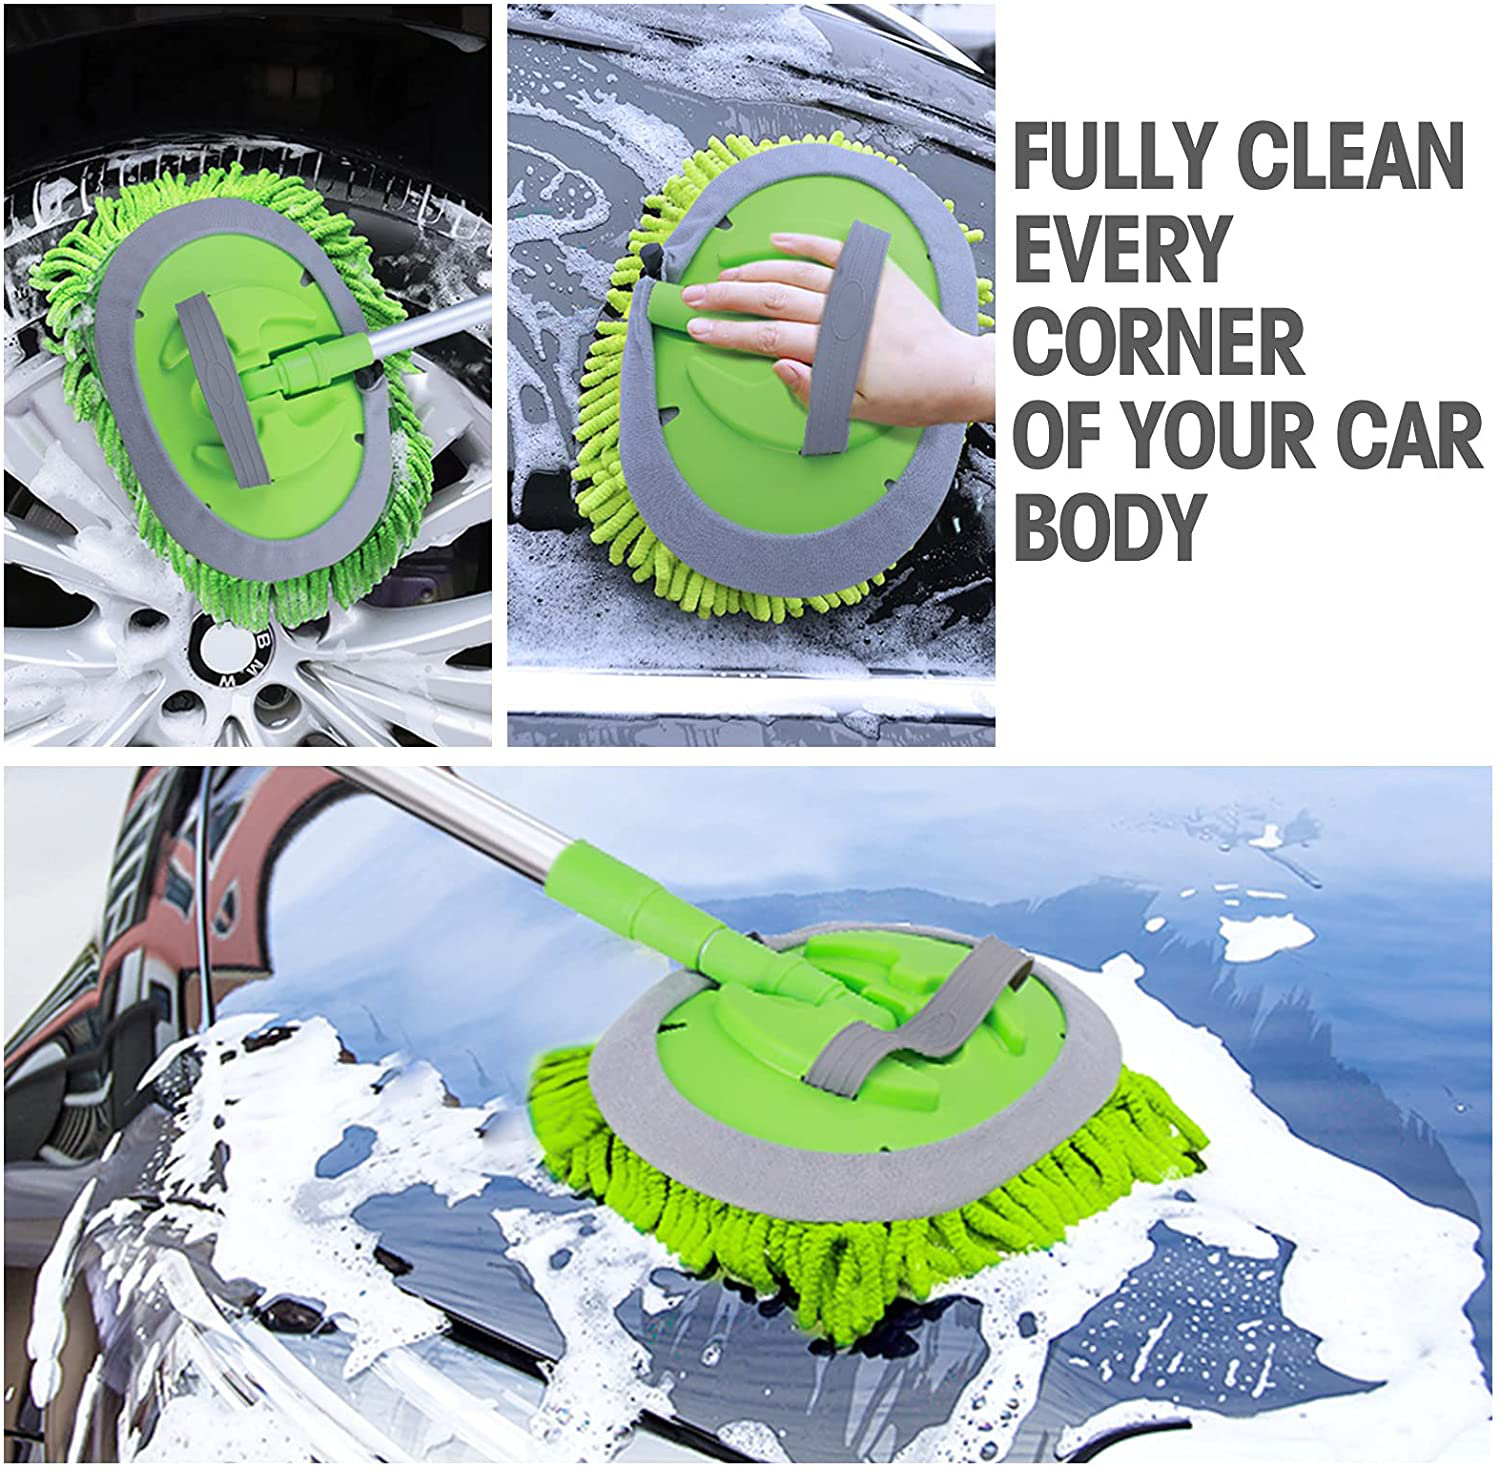 2 In 1 Car Wash Brush with Long Handle Aluminium Alloy 44 Inches, Chenille Microfiber Car Wash Mop Mitt Scratch Free Duster with Extension Pole, Car Cleaning Supplies Kit,3 Pcs Mop Heads (Green)